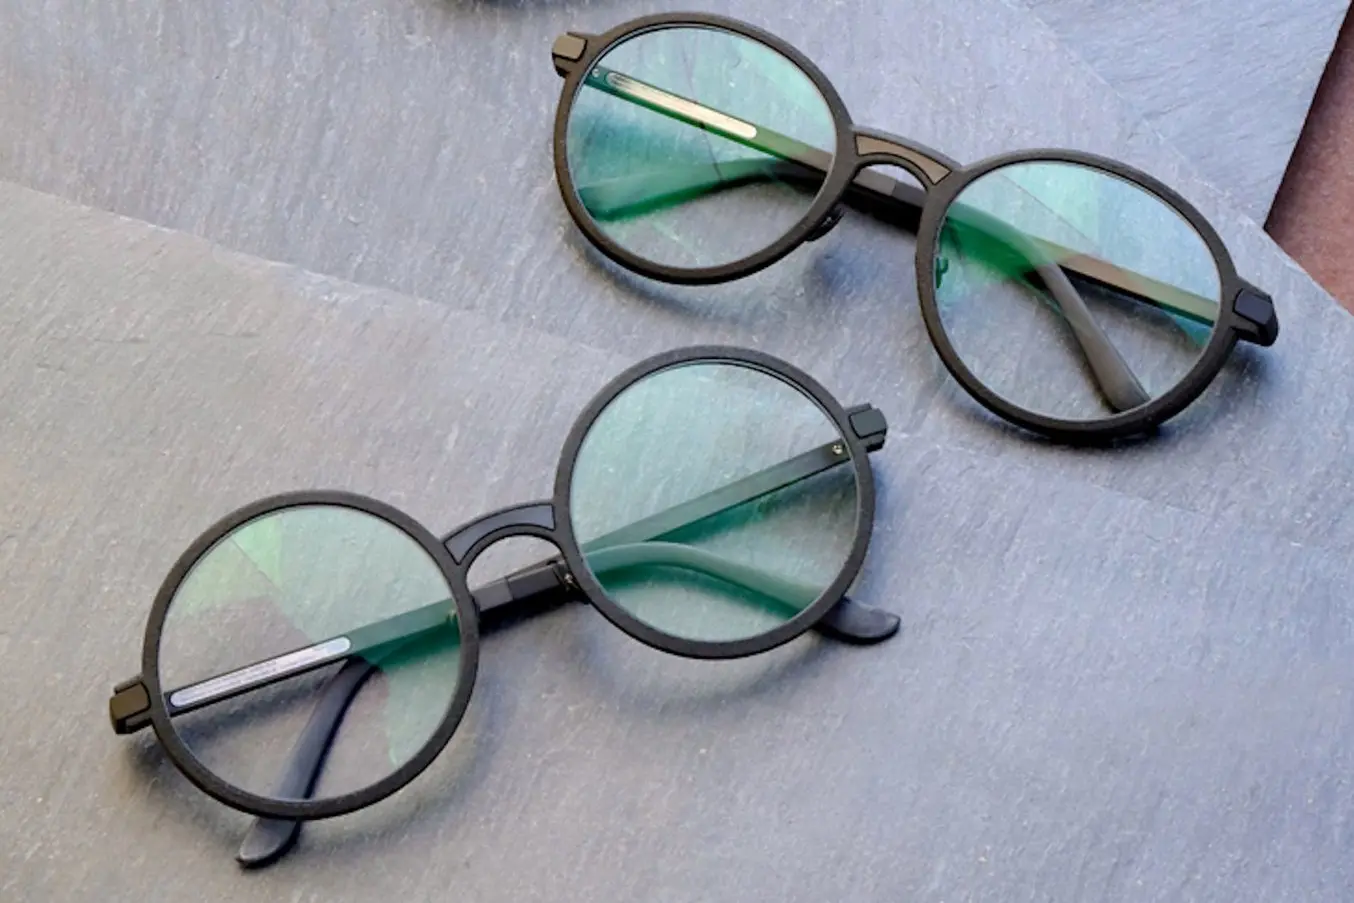 product innovation - glasses made with 3D printing